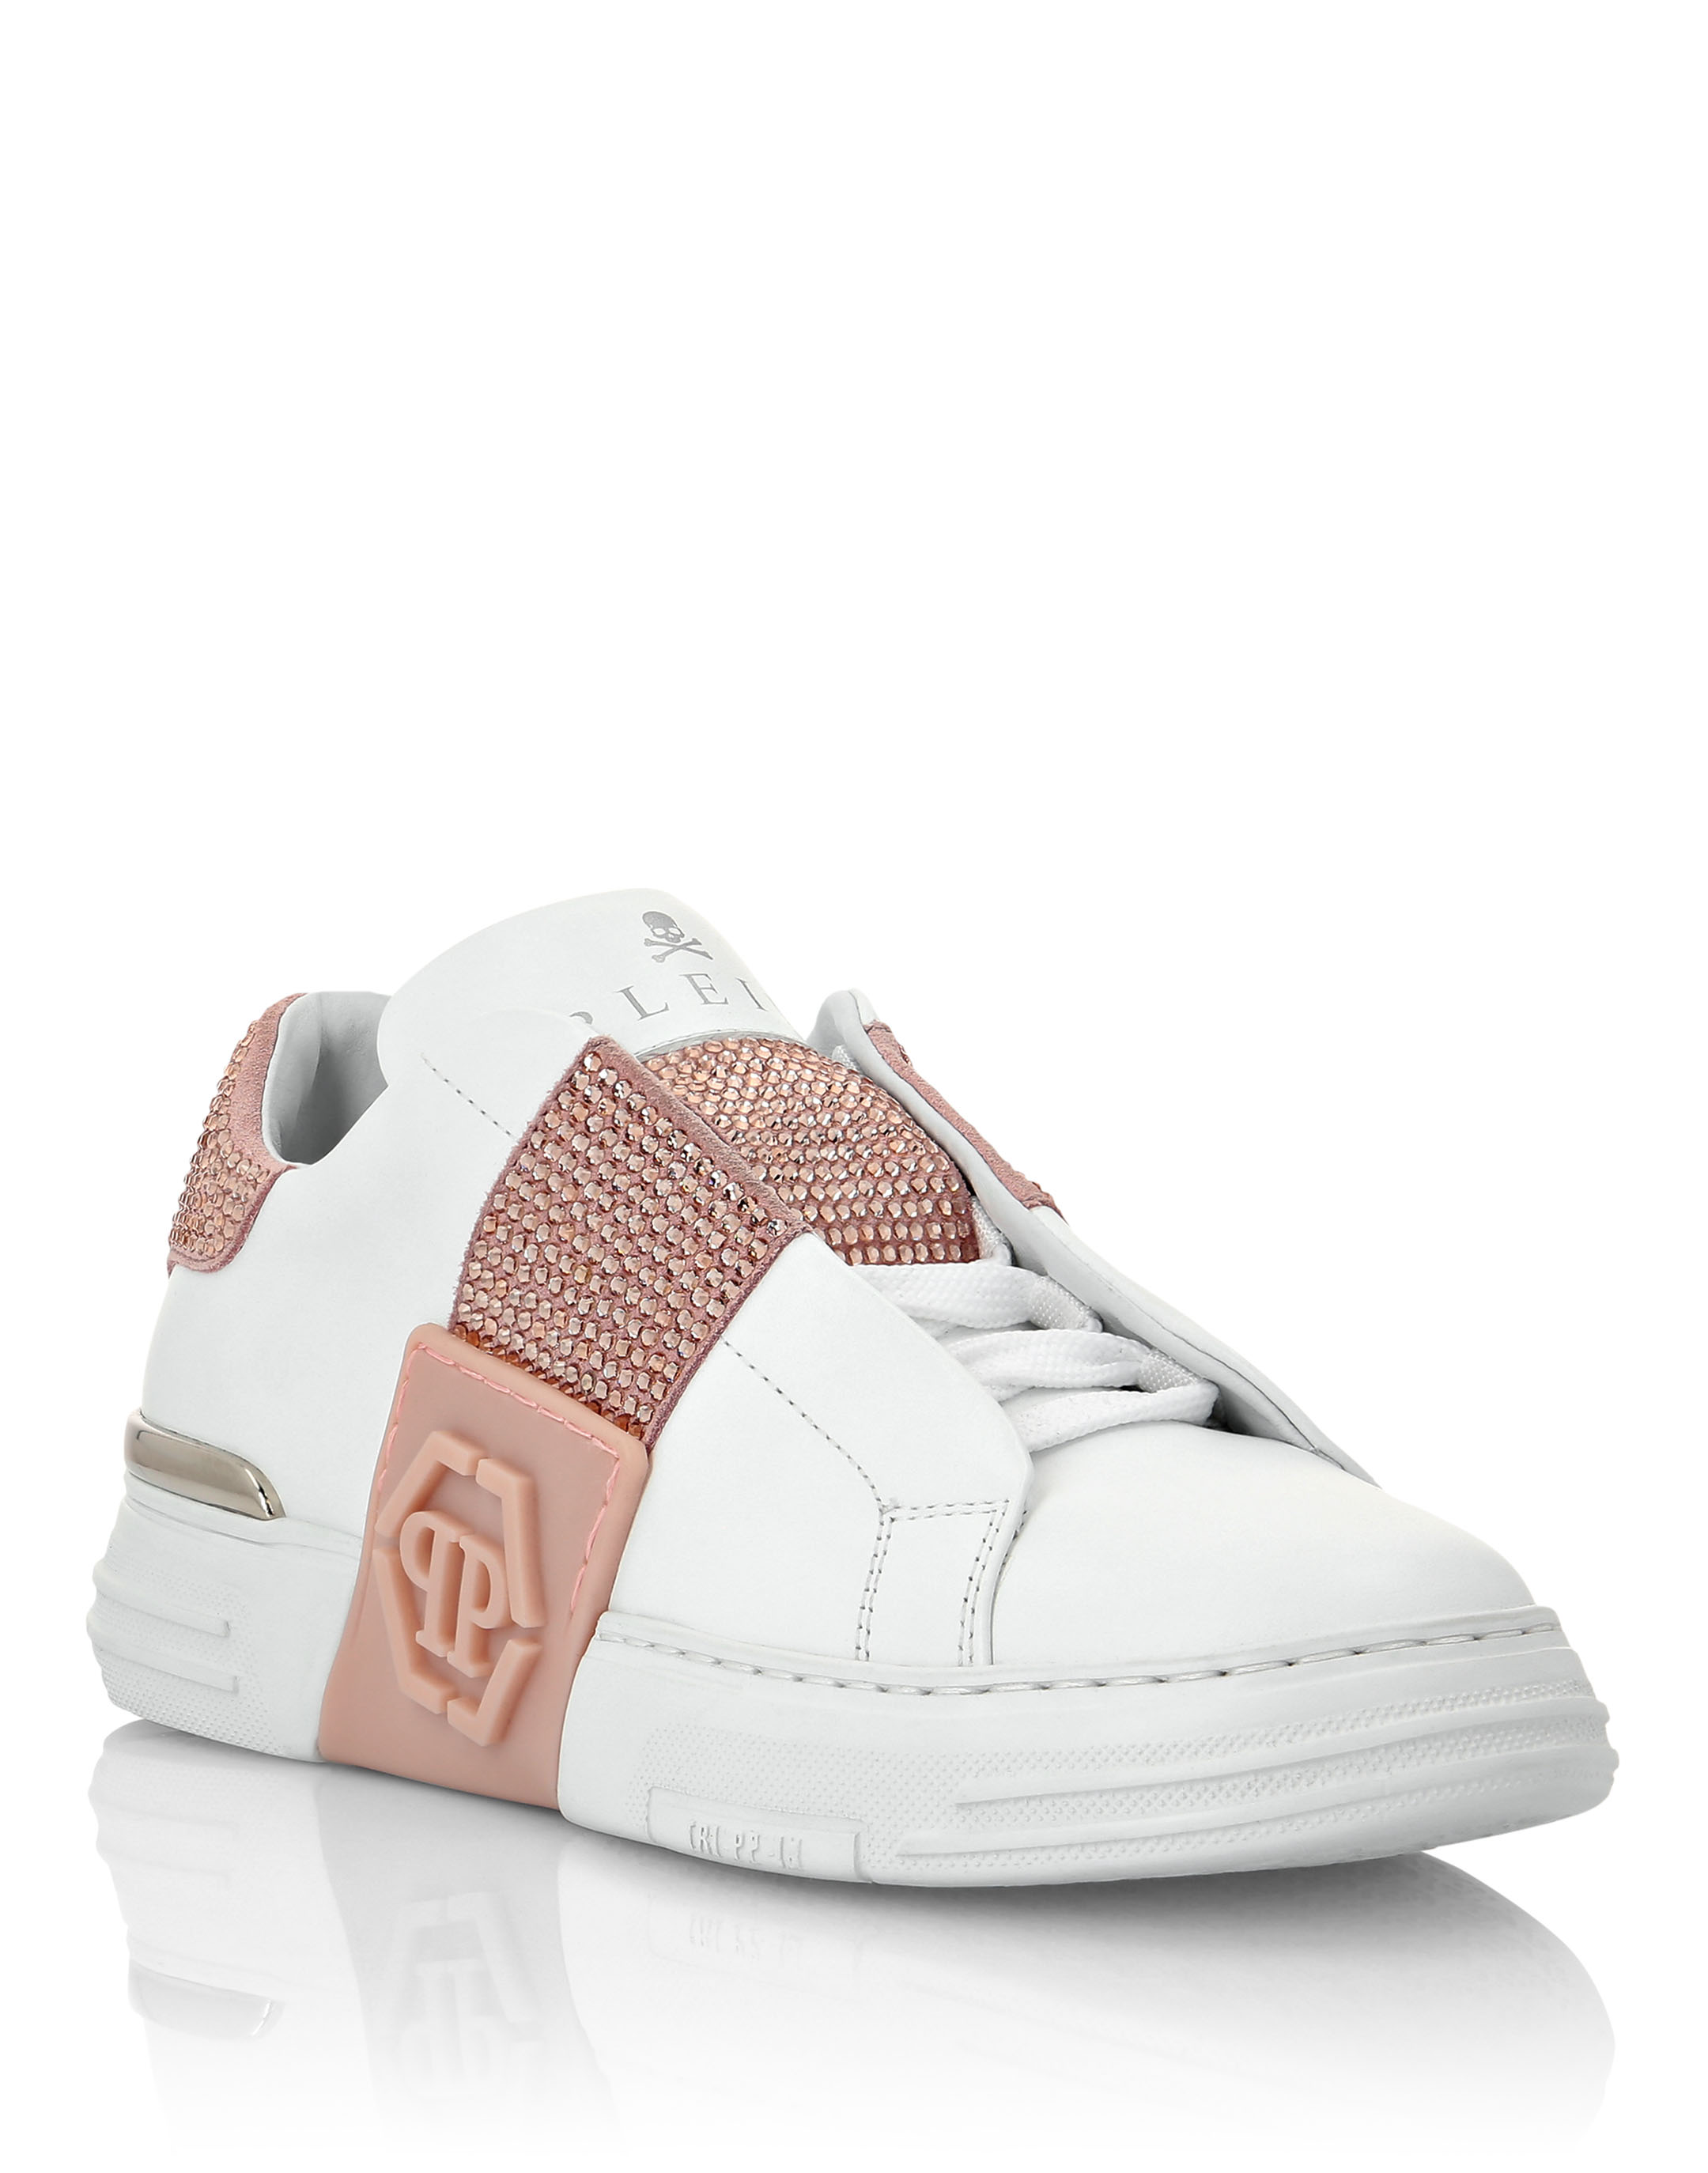 LO-TOP PHANTOM KICK$ LEATHER HEXAGON WITH Crystals | Plein Outlet